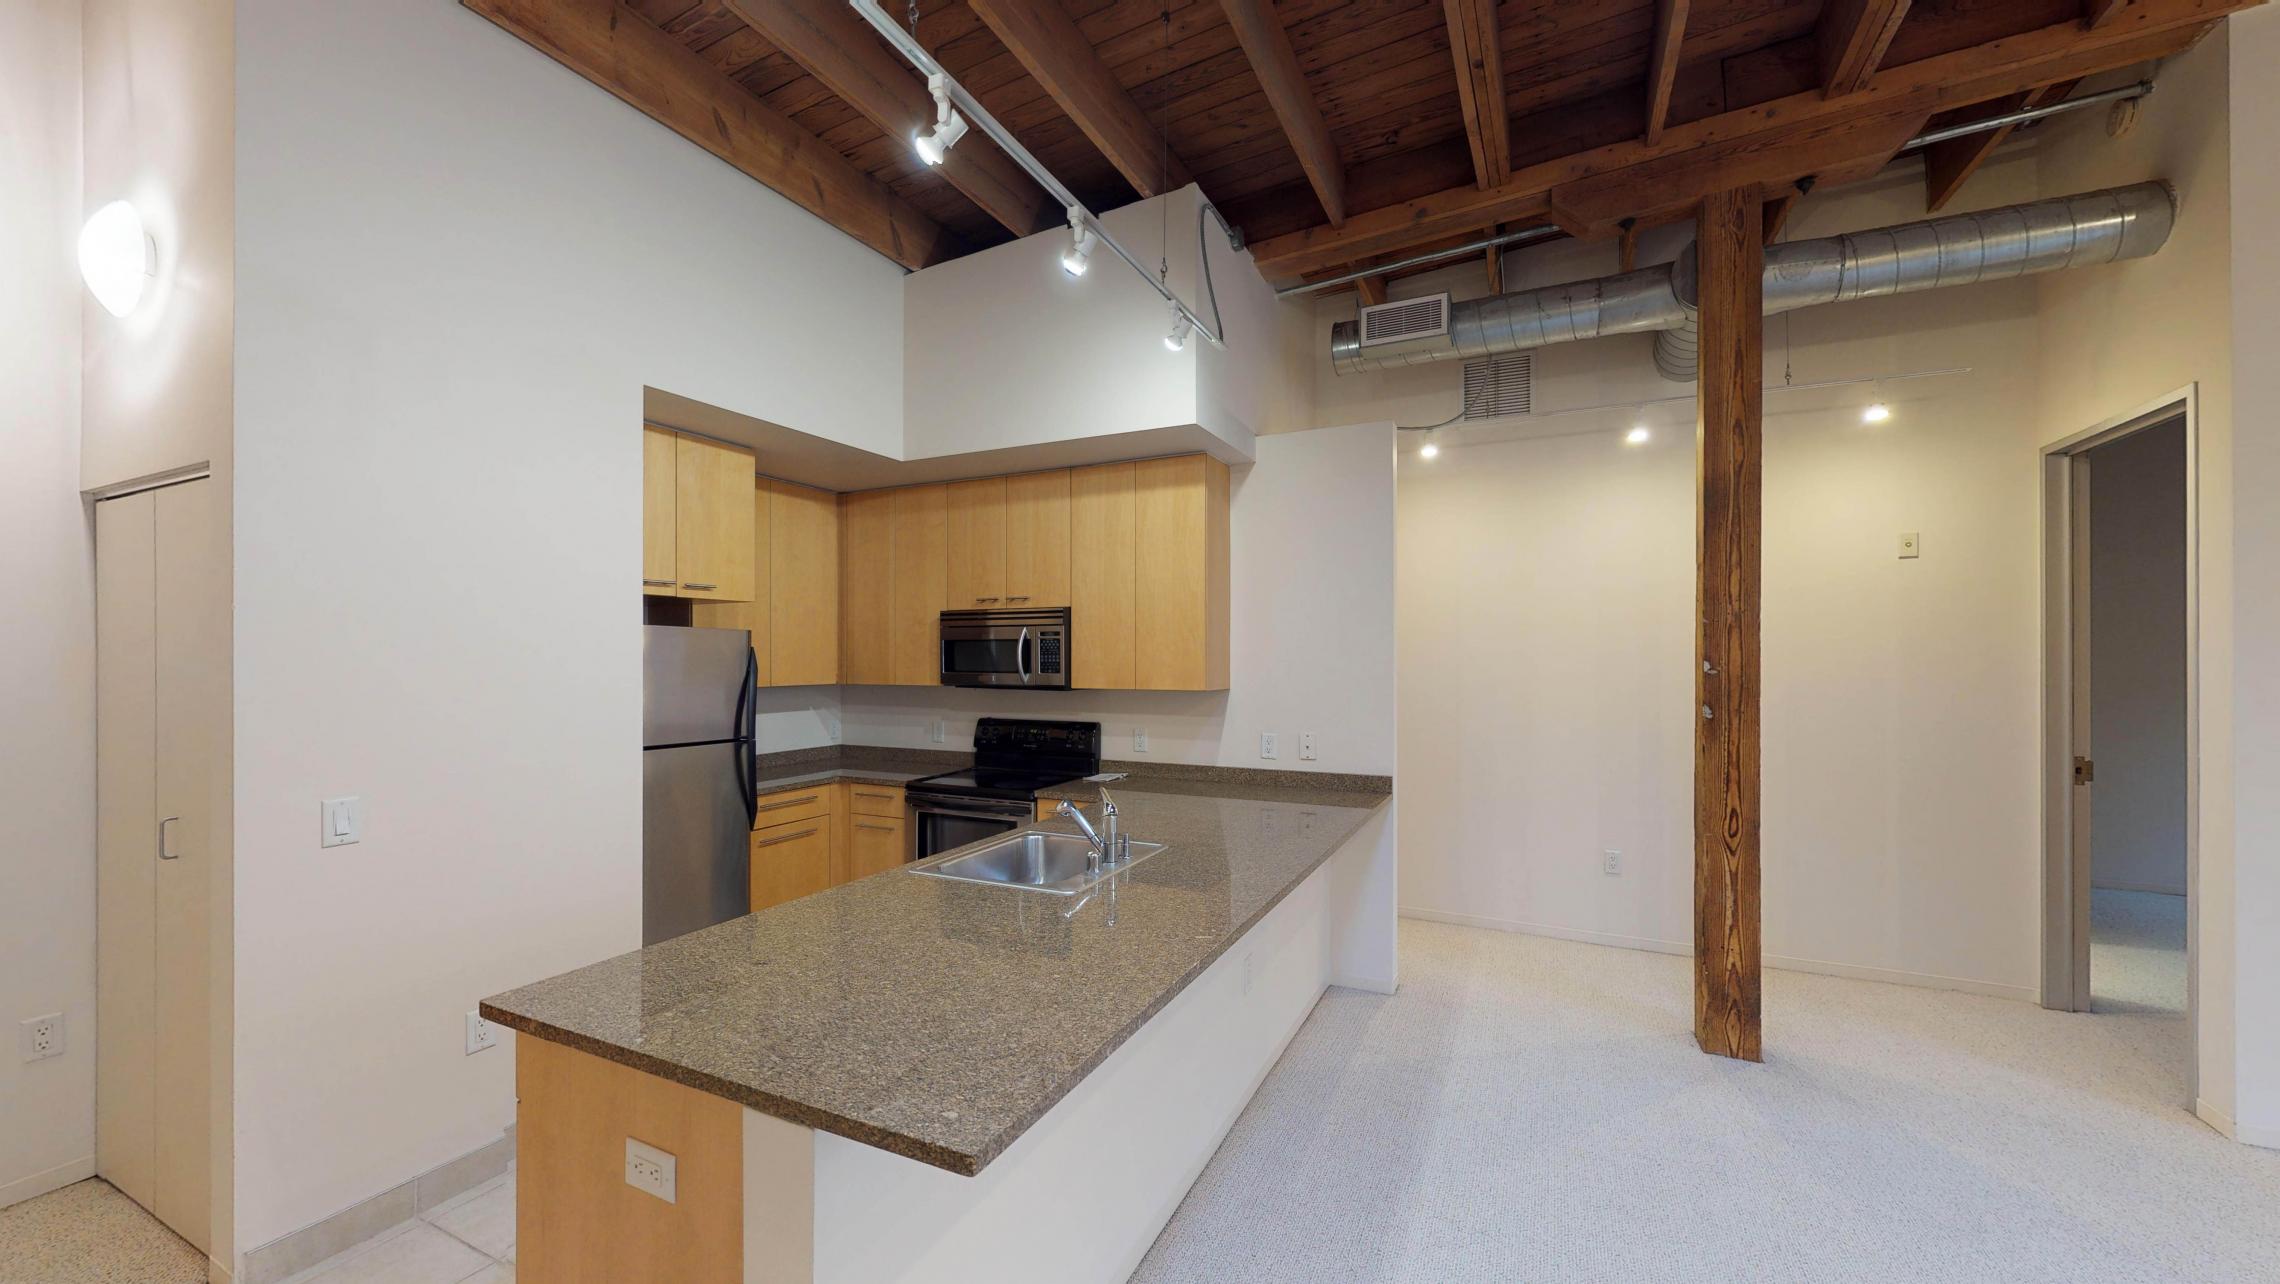 Tobacco-Lofts-Apartments-Lofted-Design-Unique-Upscale-Stunning-Sunshine-Cats-Lofted-Brick-Garage-Courtyard-Grill-Fitness-Historic-Yards-Warehouse-Apartment- W209-One-Bedroom-Skylight 